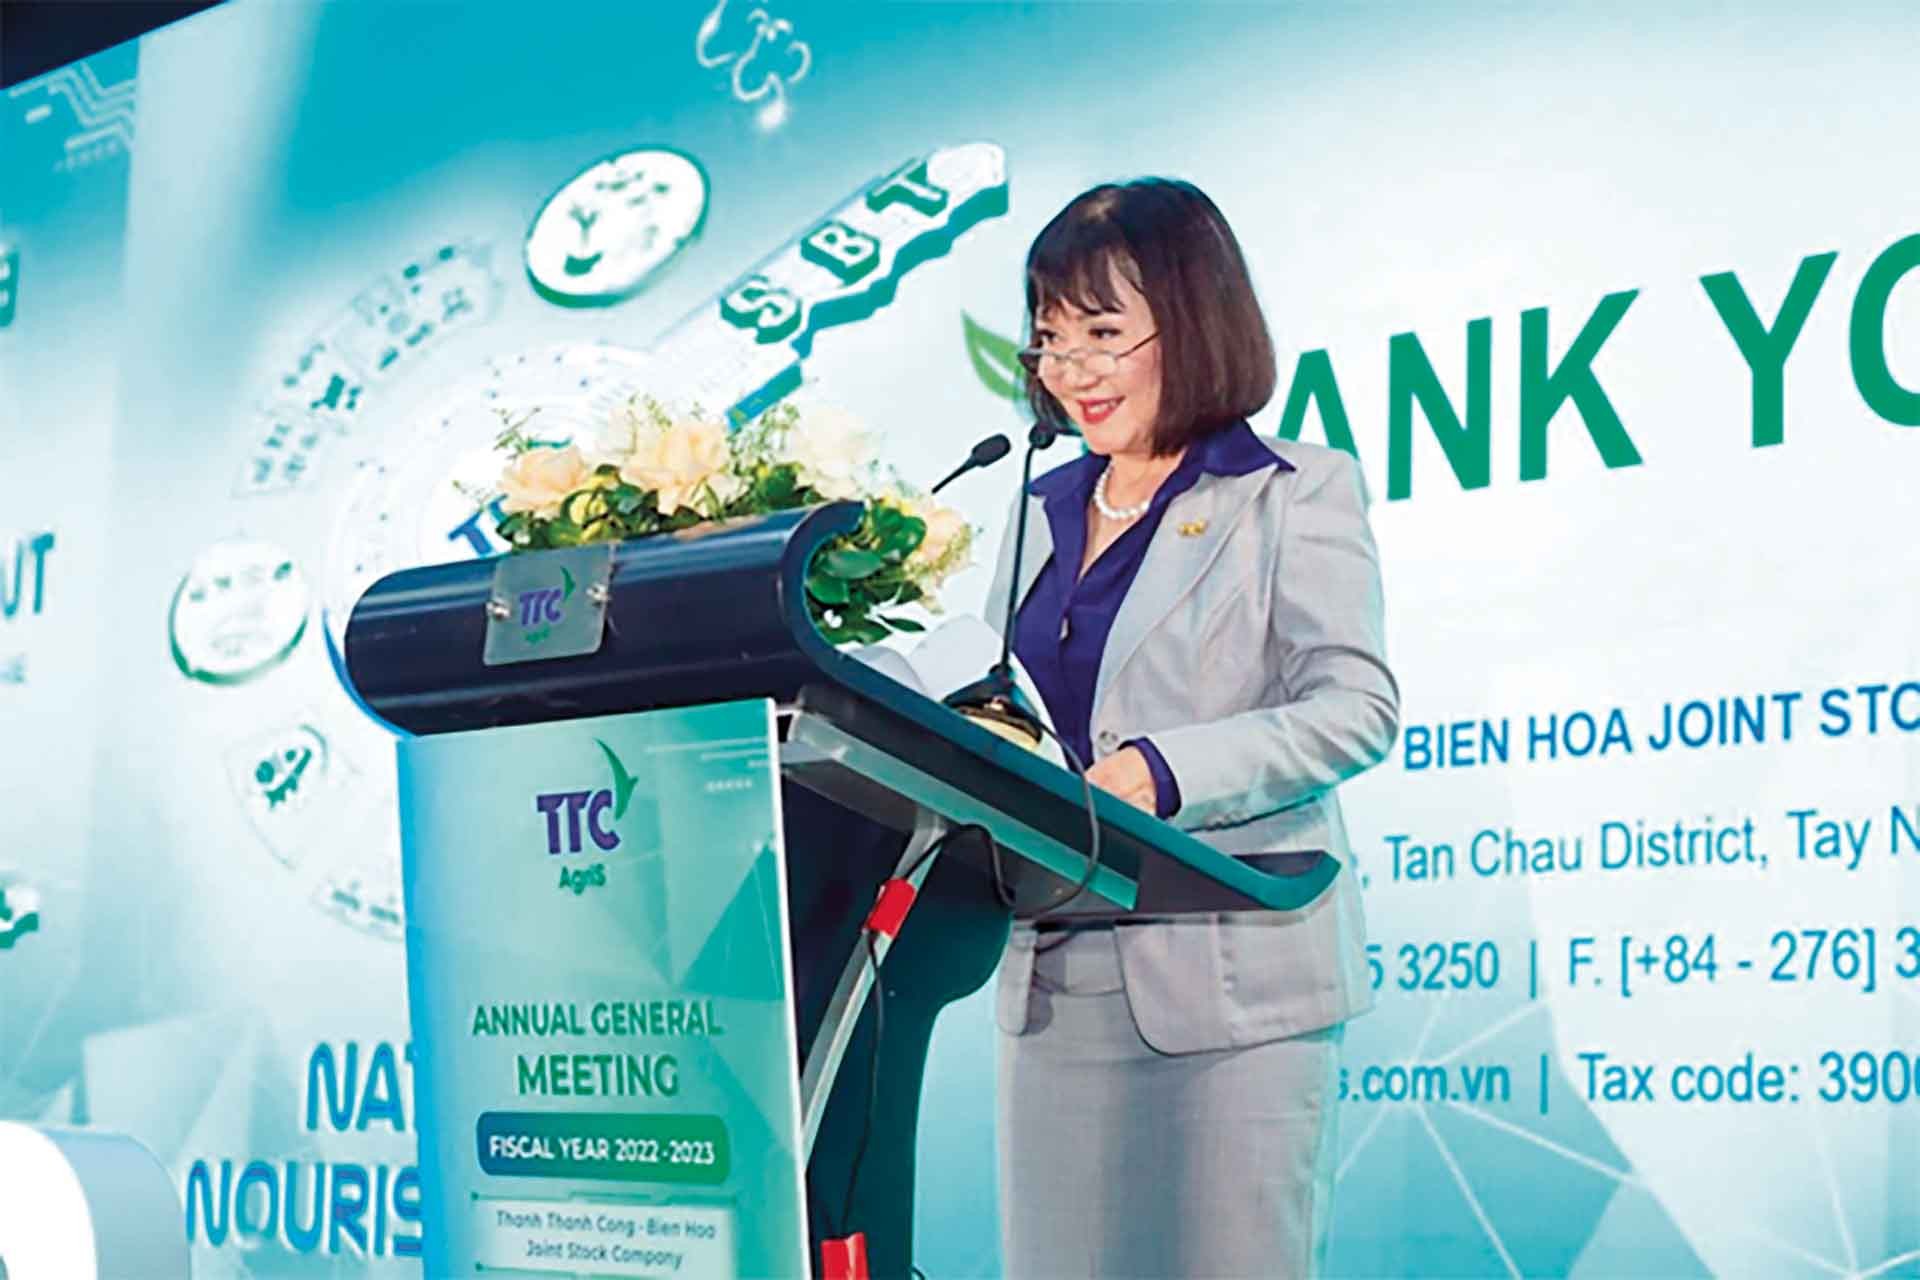 Mrs. Huynh Bich Ngoc, Chairlady of TTC AgriS, at the Annual General Meeting Financial Year 2022-2023.